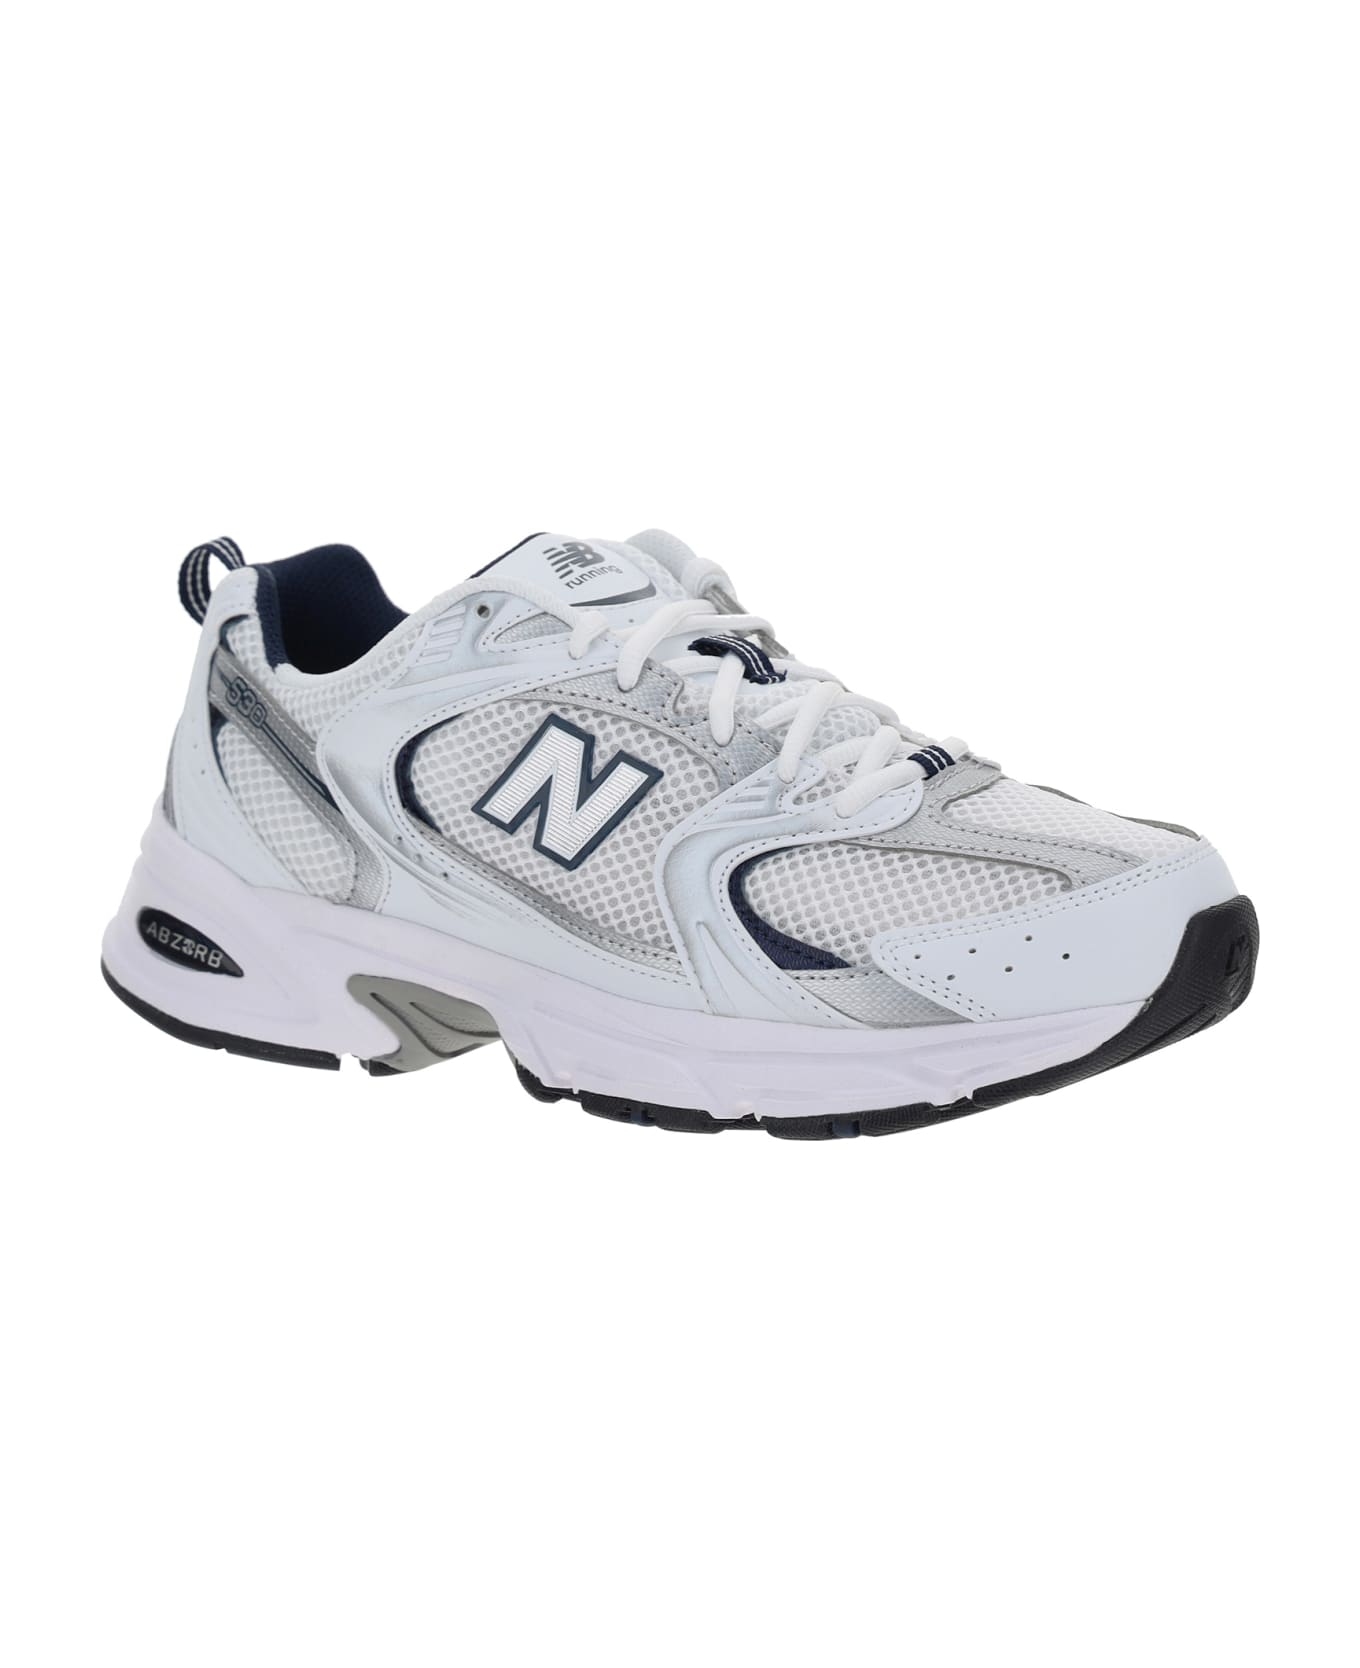 New Balance Lifestyle Sneakers - White/blue D